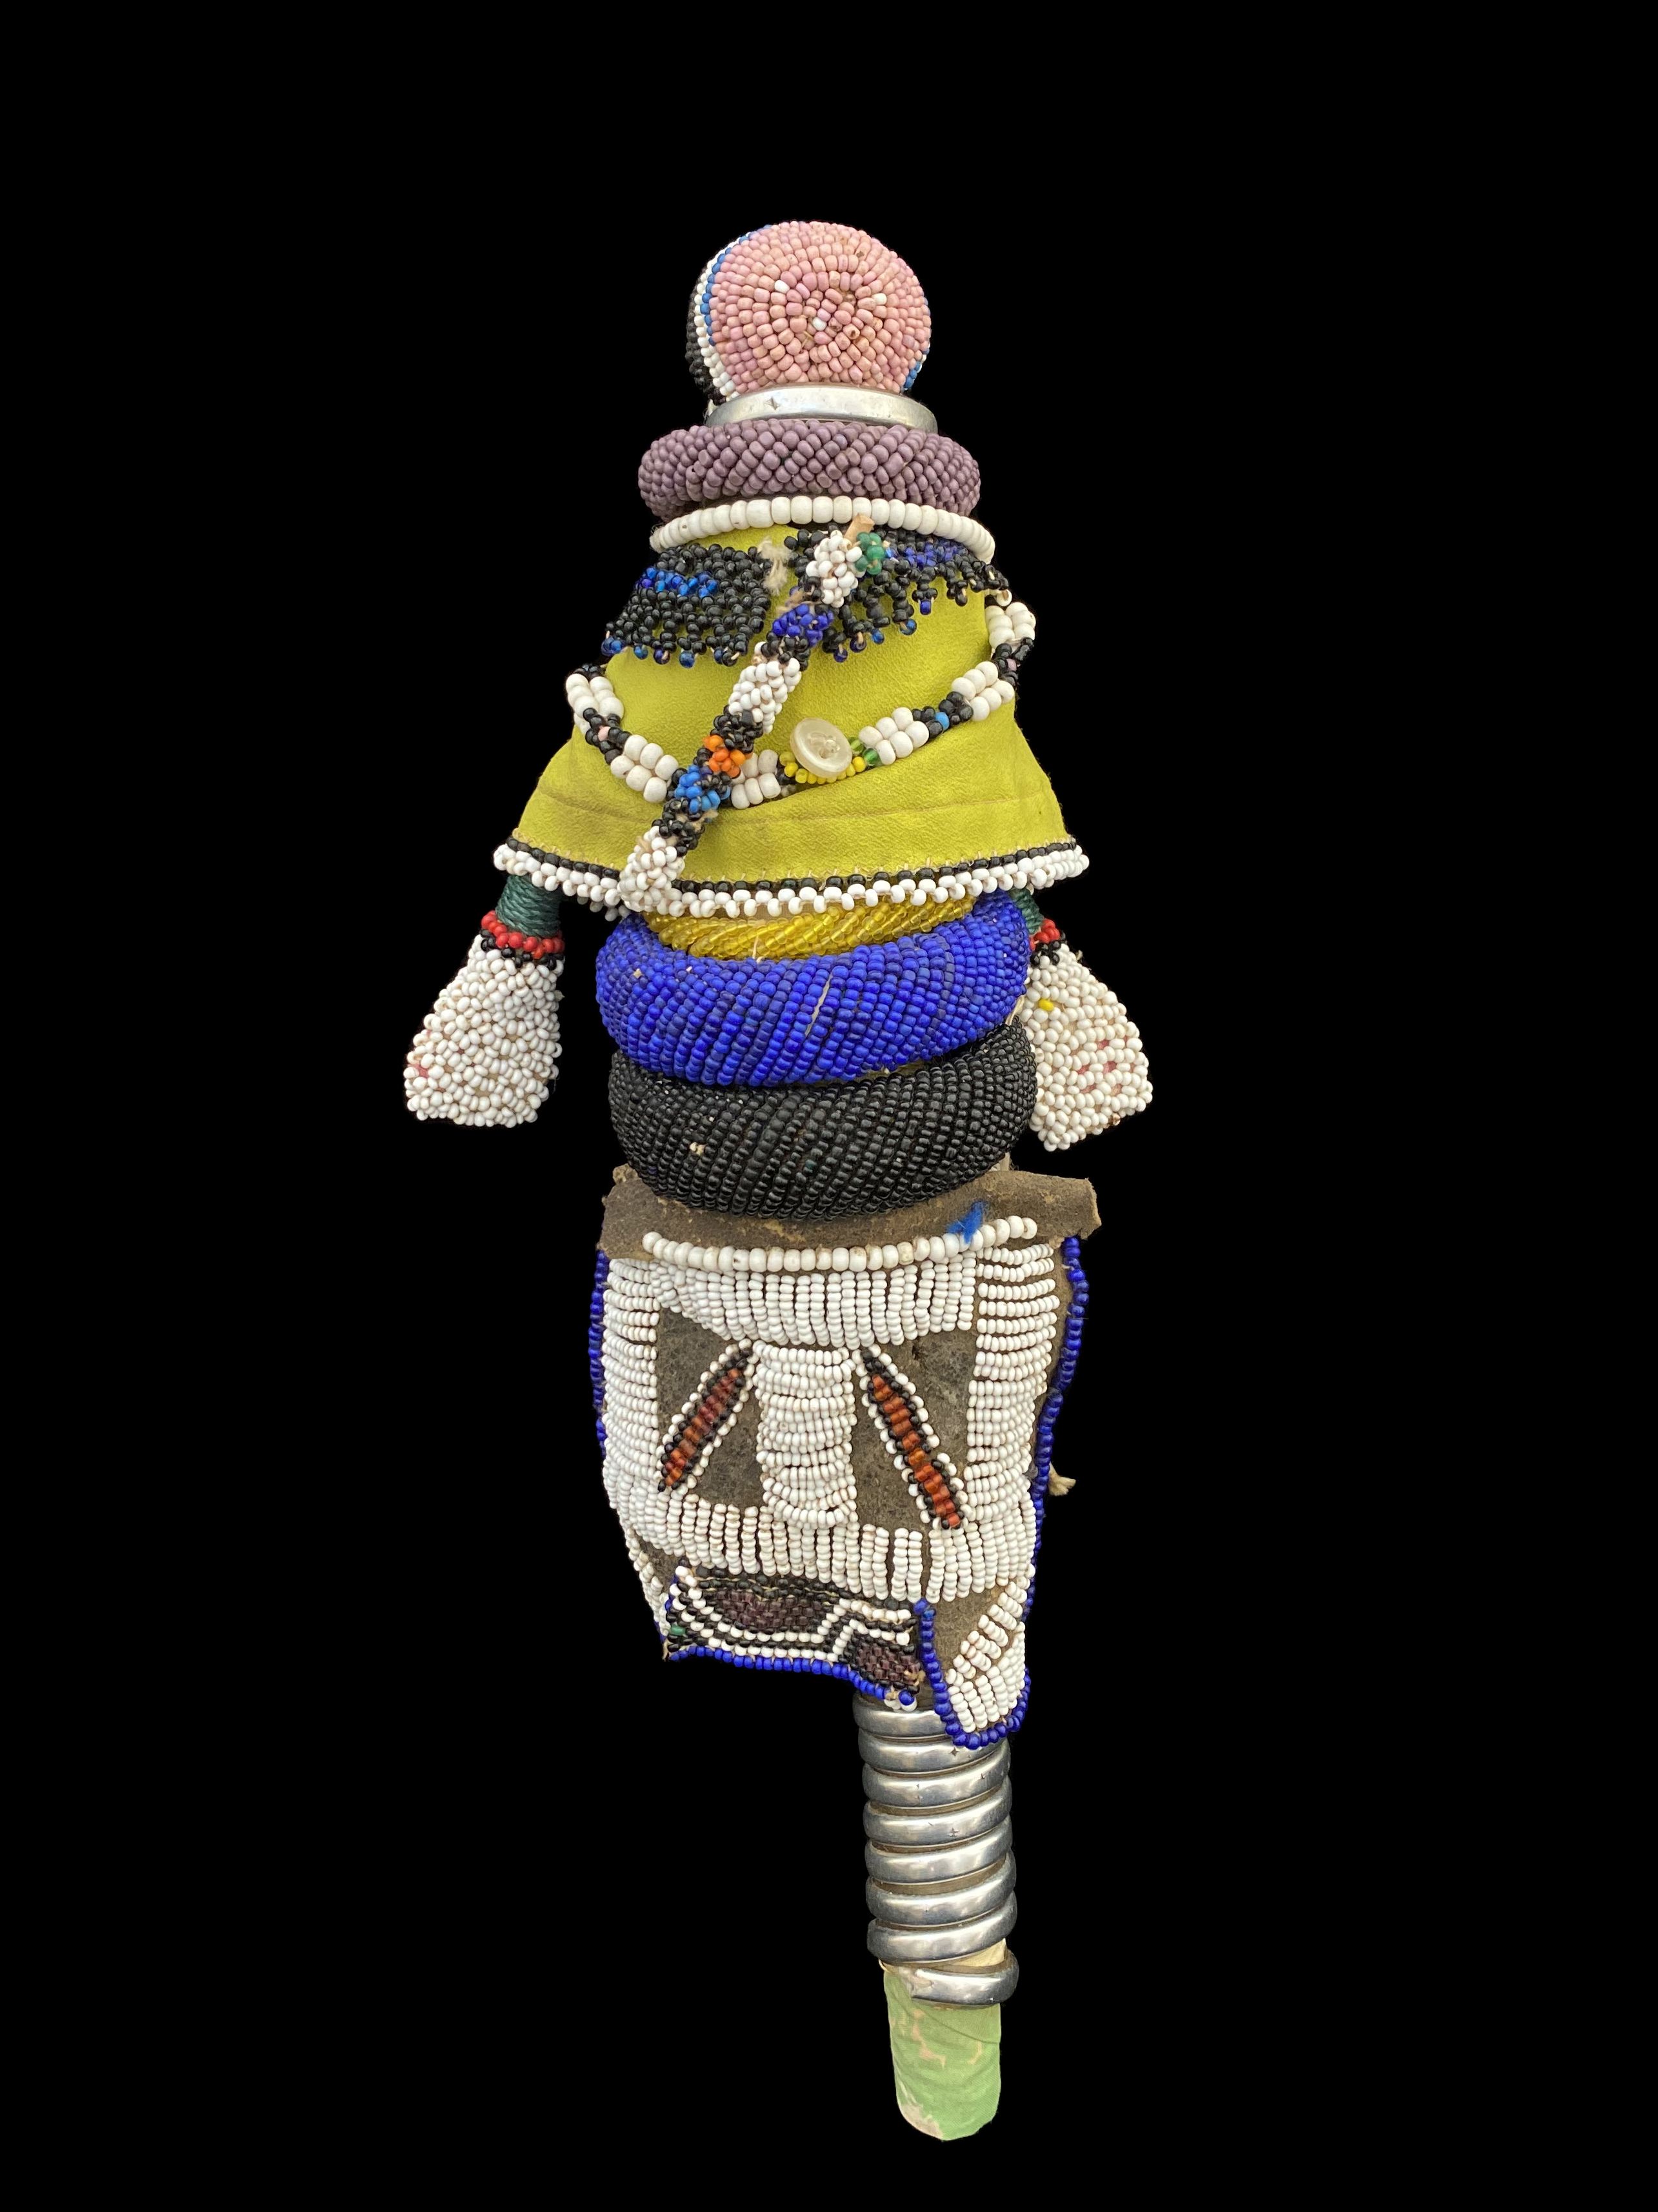 Old Initiation Doll - Ndebele People, South Africa